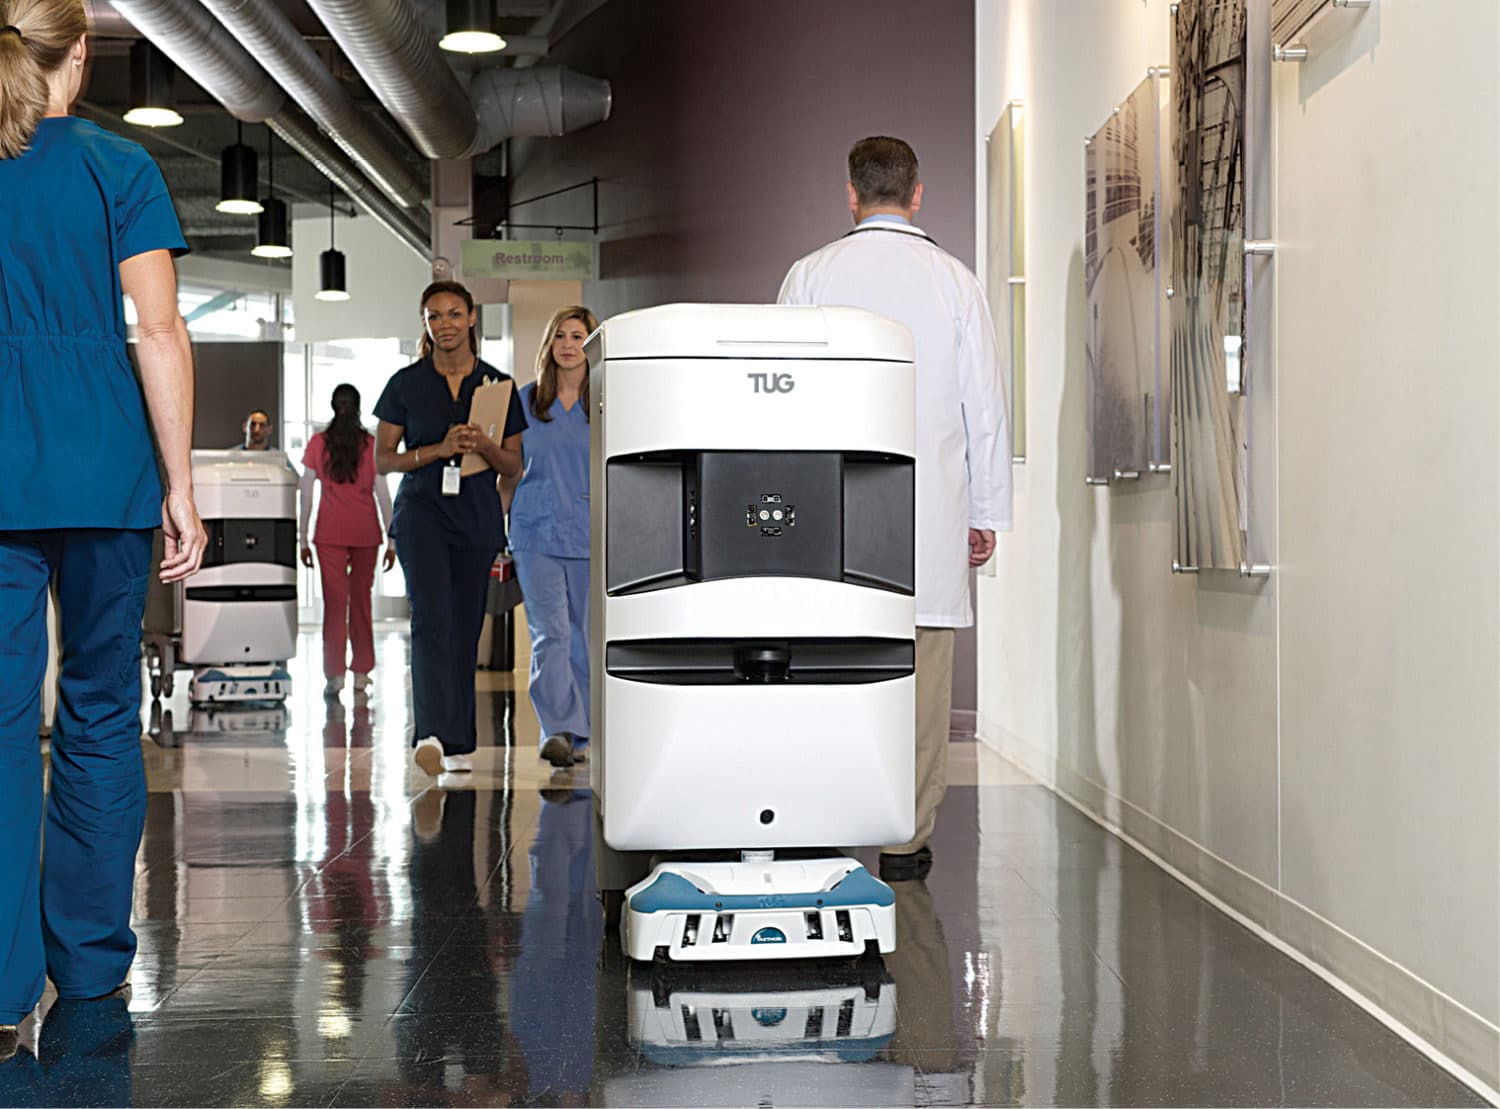 Aethon TUG cobot automates delivery and material movement in hospitals